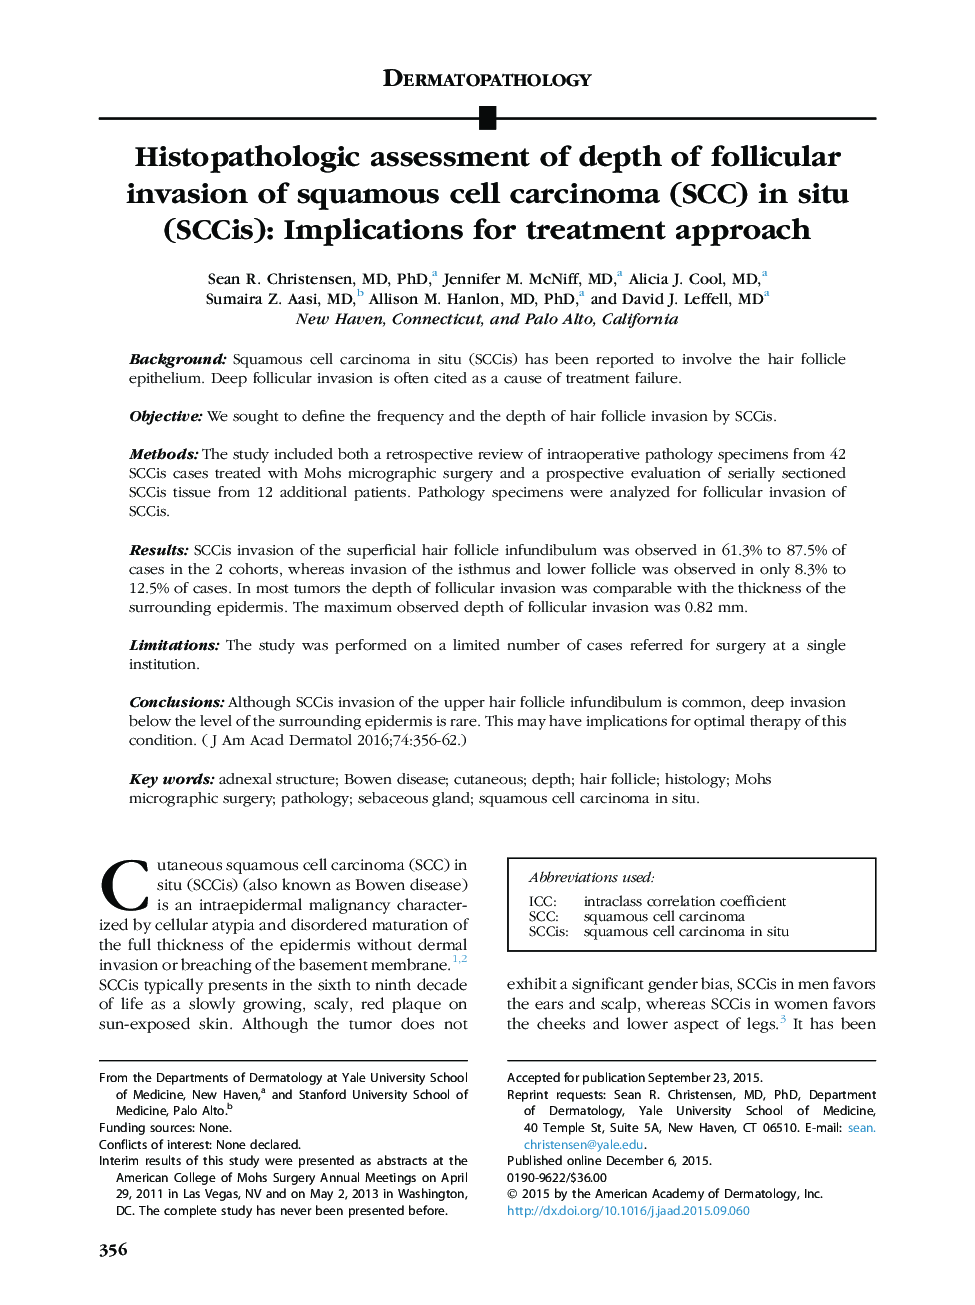 Histopathologic assessment of depth of follicular invasion of squamous cell carcinoma (SCC) in situ (SCCis): Implications for treatment approach